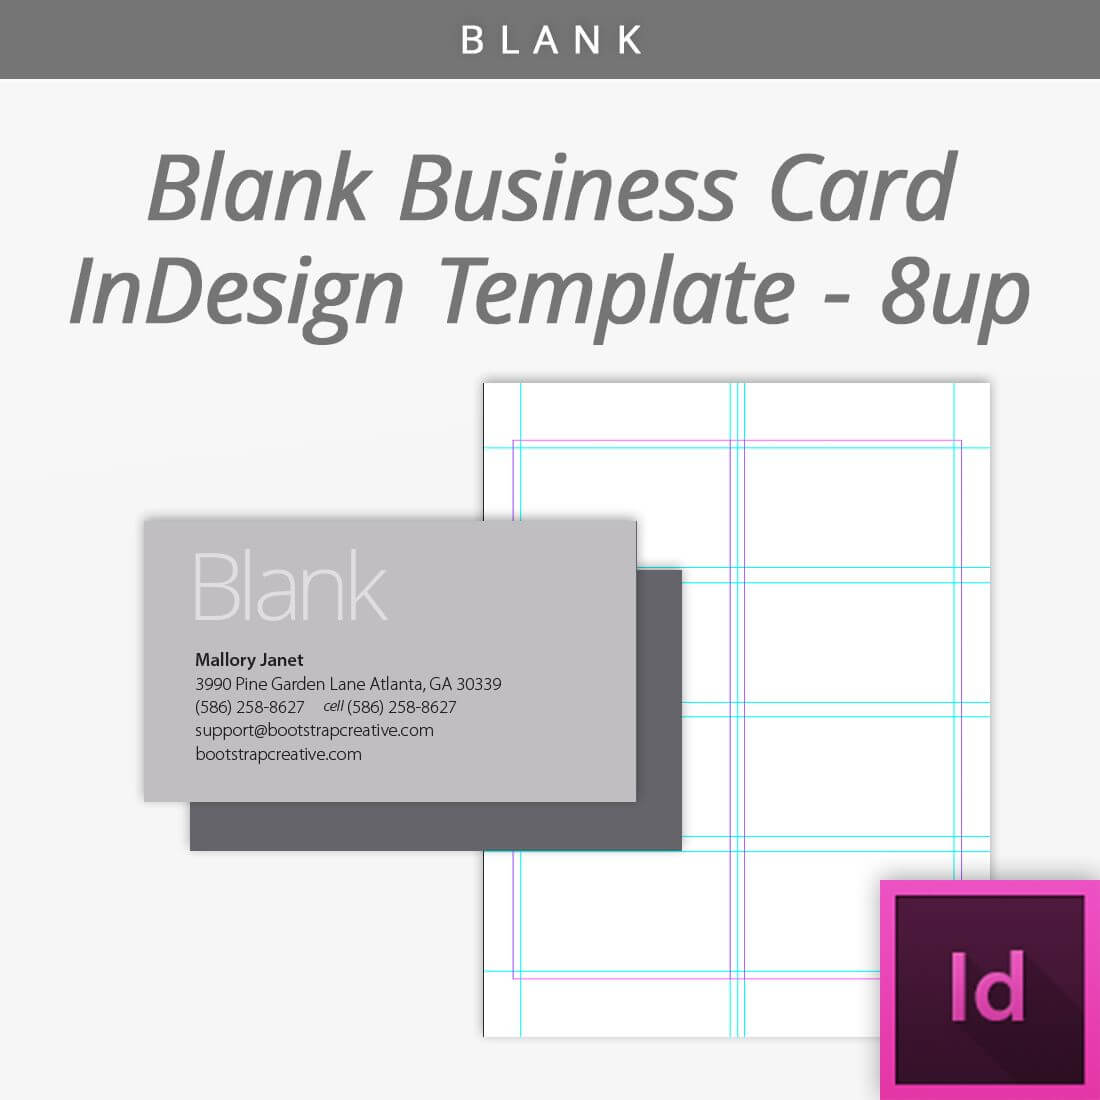 Bootstrap Creative | Blank Business Cards, Free Business For Blank Business Card Template Download